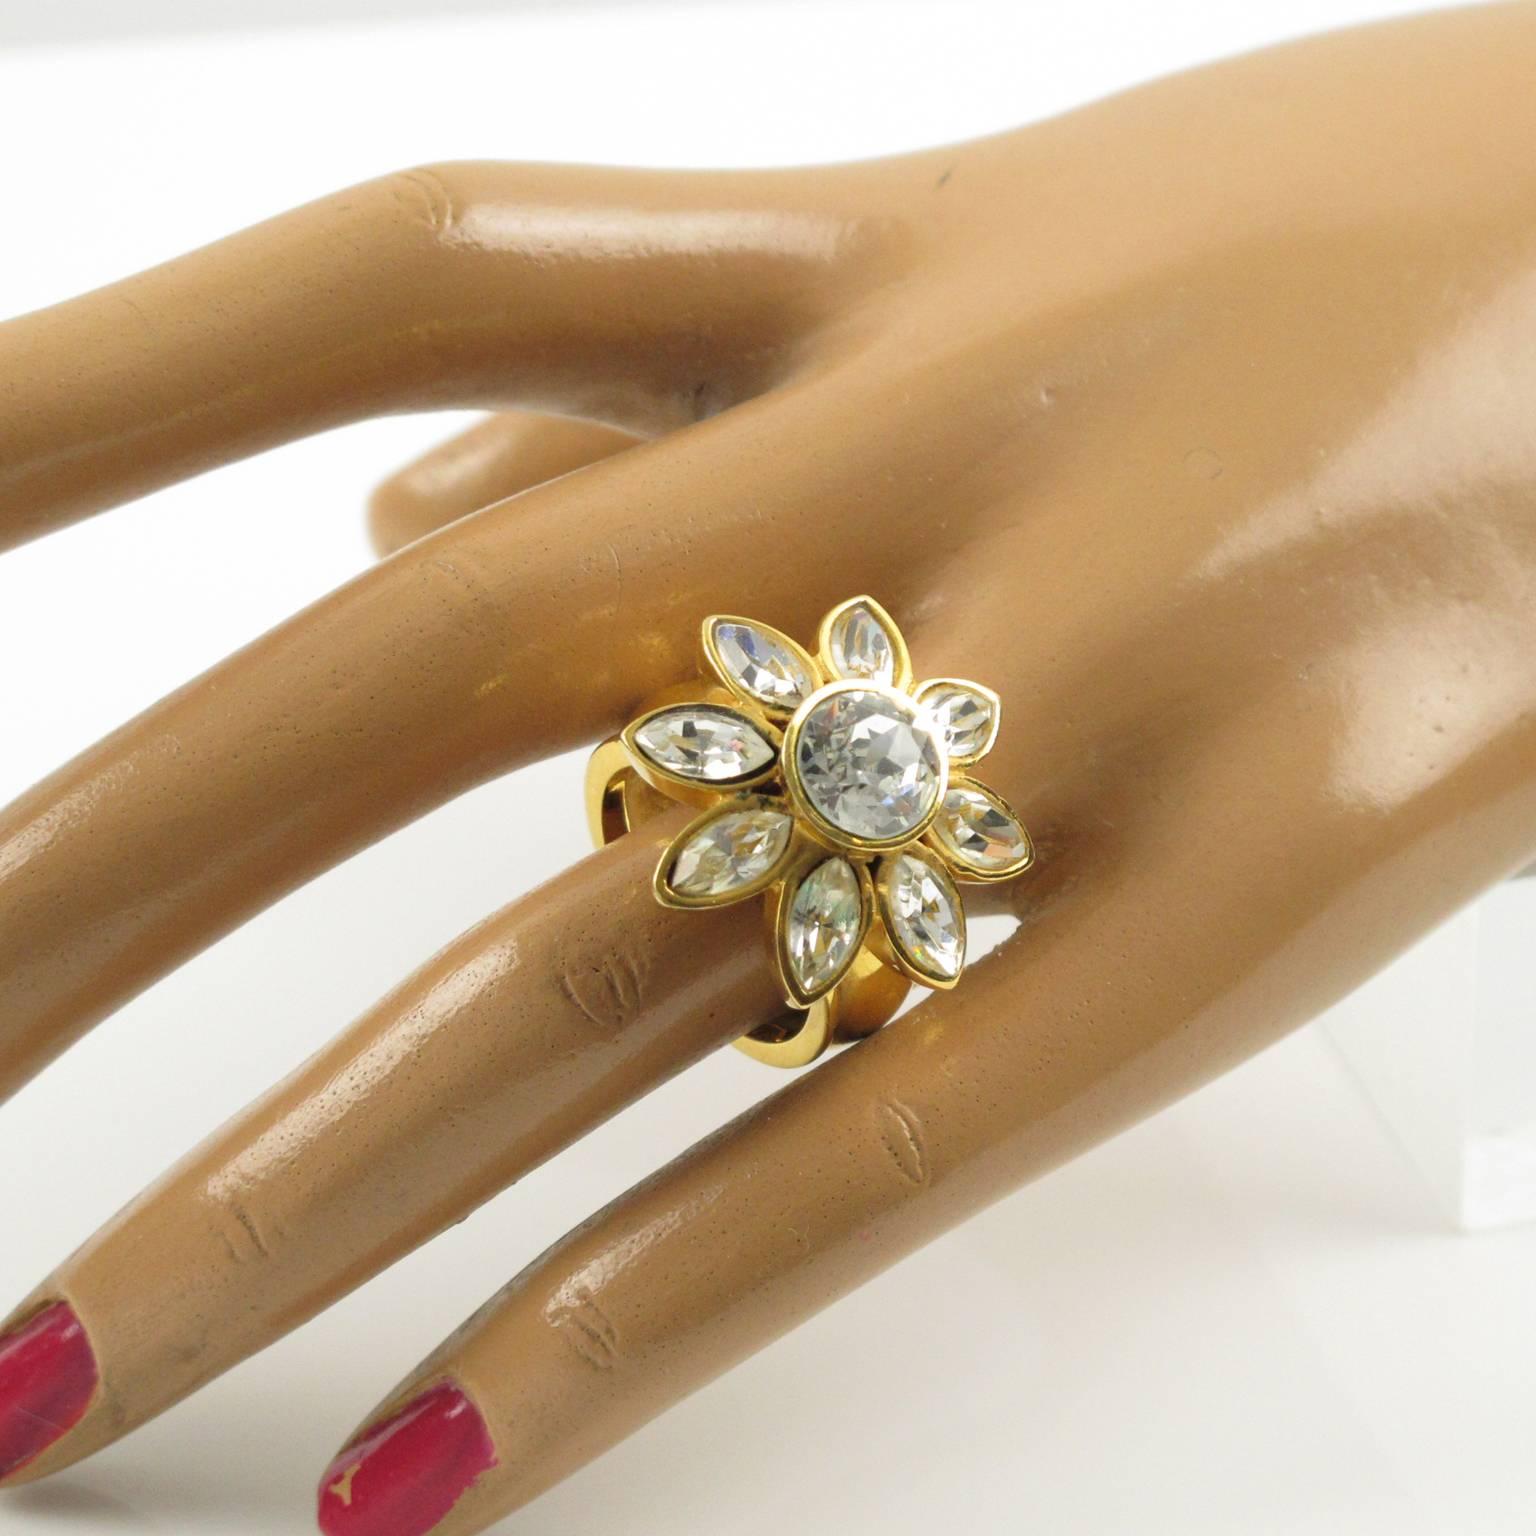 Jeweled cocktail ring by YVES SAINT LAURENT, YSL Paris. Floral shape with large band in gold plated metal ornate with rhinestone in pear shape, crystal clear color. Signed in the inside "YSL". Excellent pre-owned vintage condition, France,